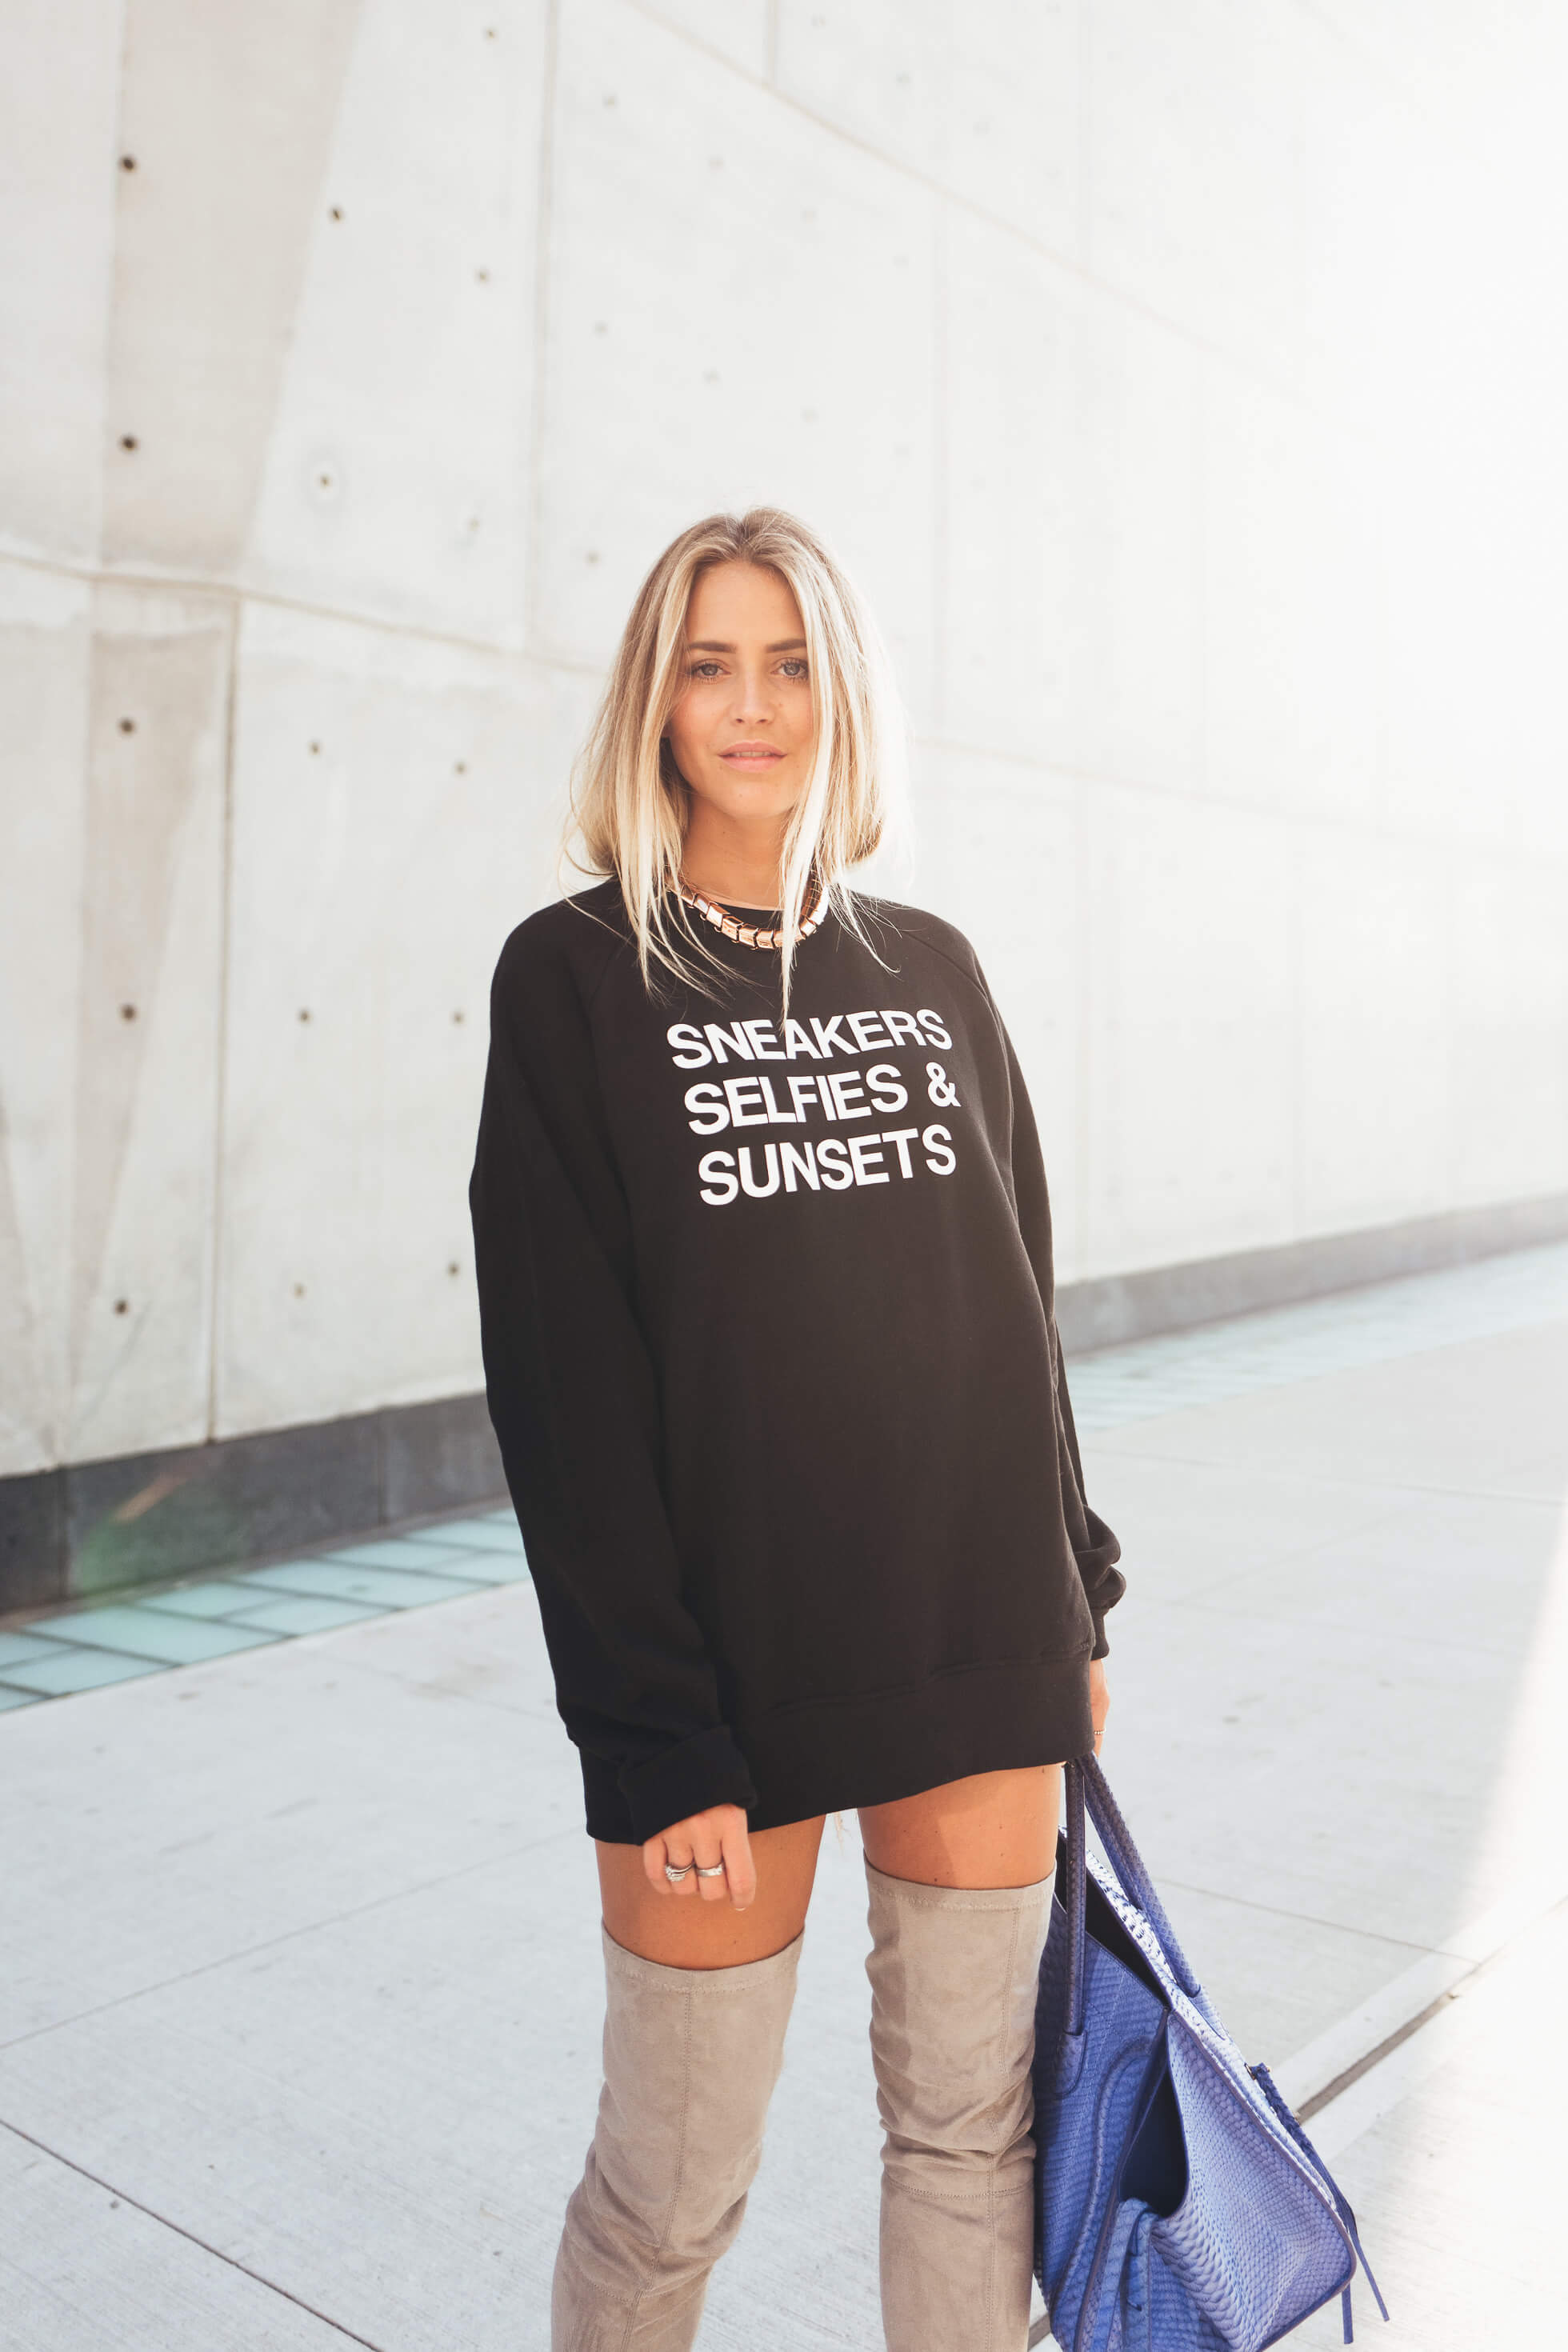 janni-deler-sneakers-selfies-sunsets-sweaterL1090945